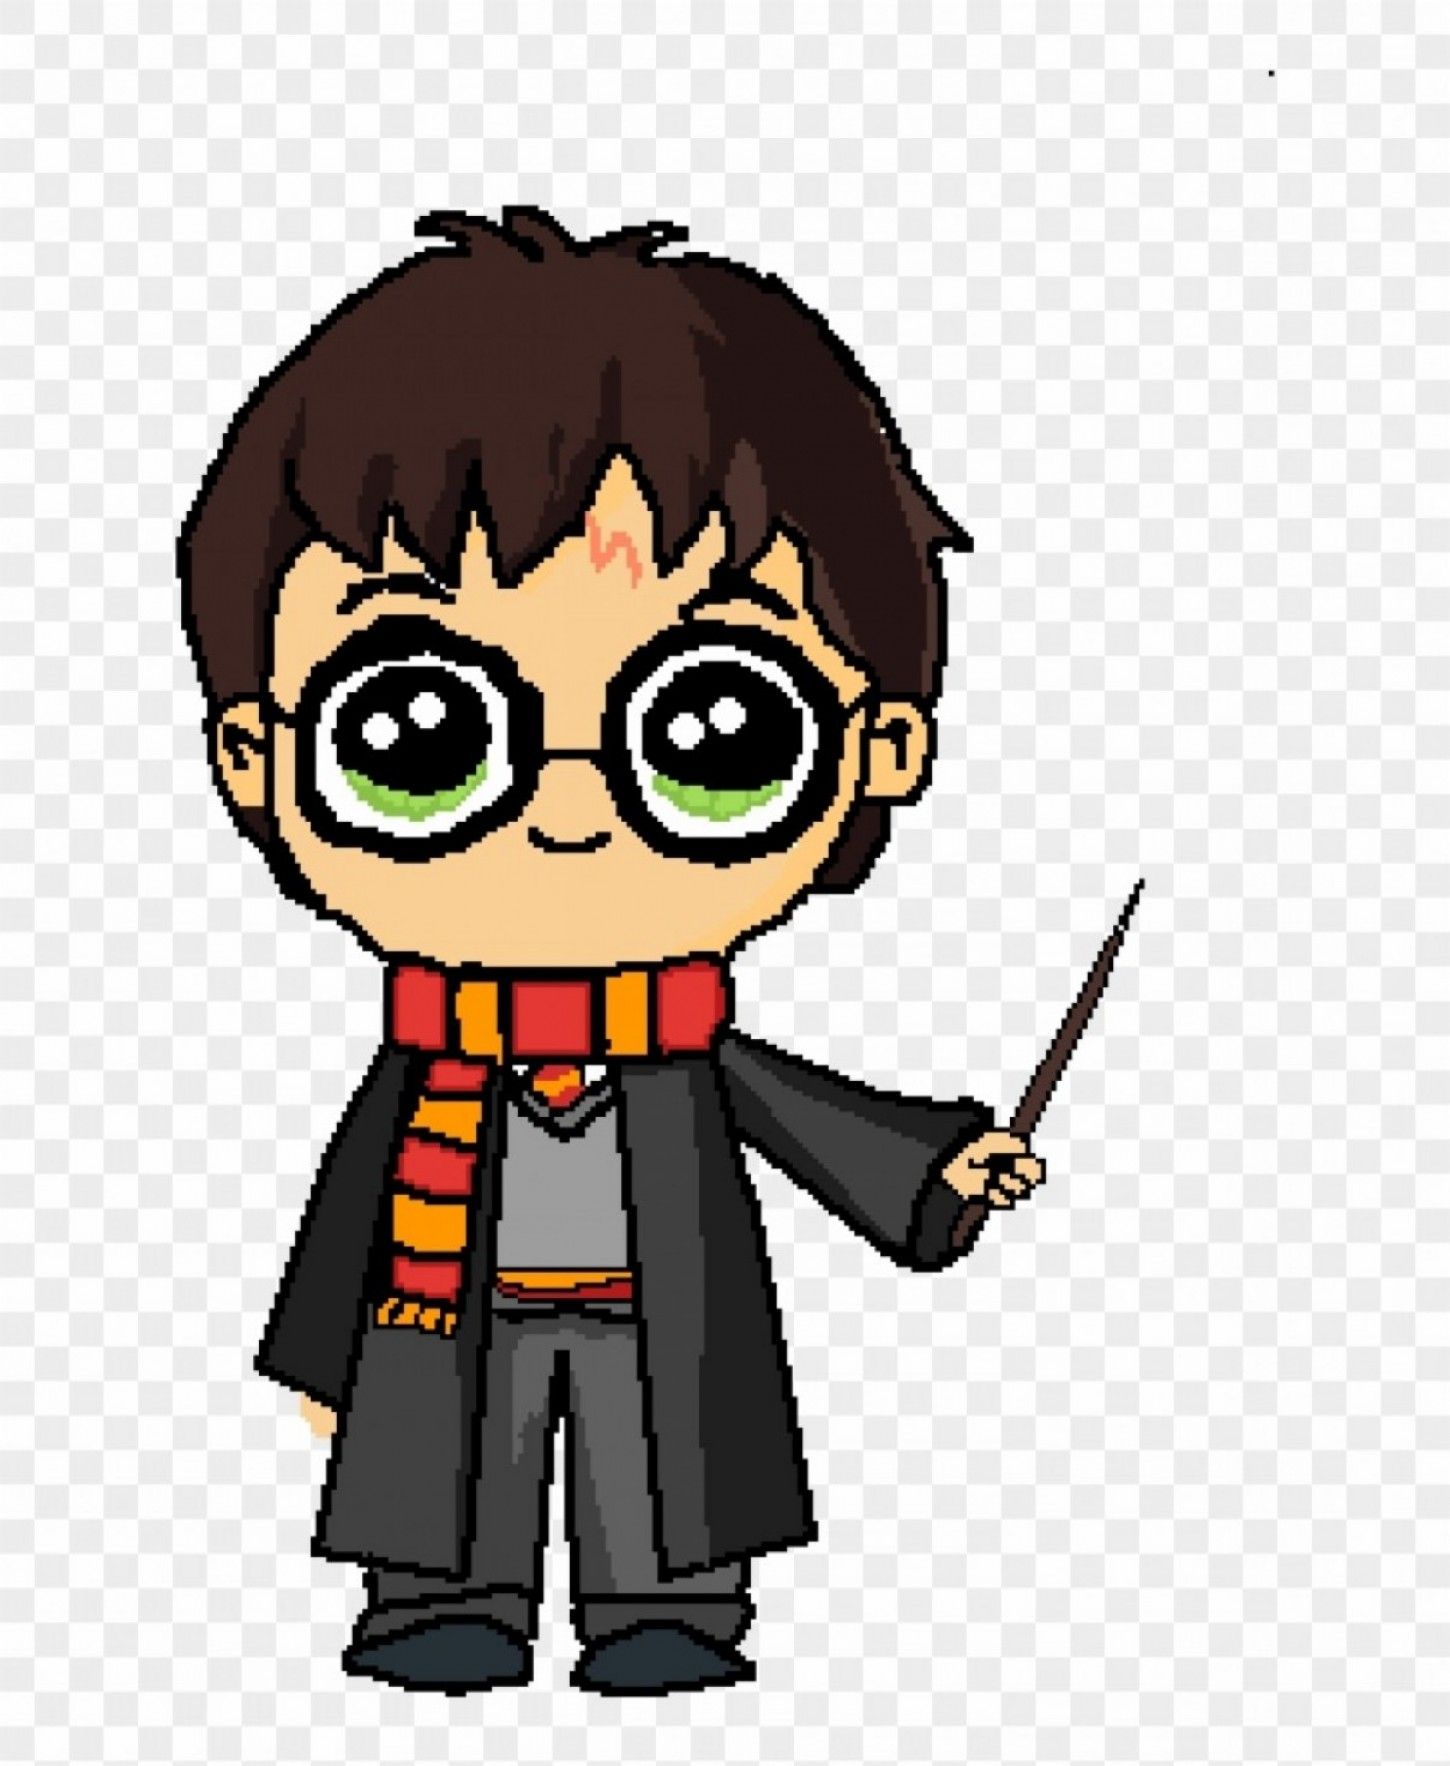 Carton Characters Harry Potter Wallpapers on WallpaperDog